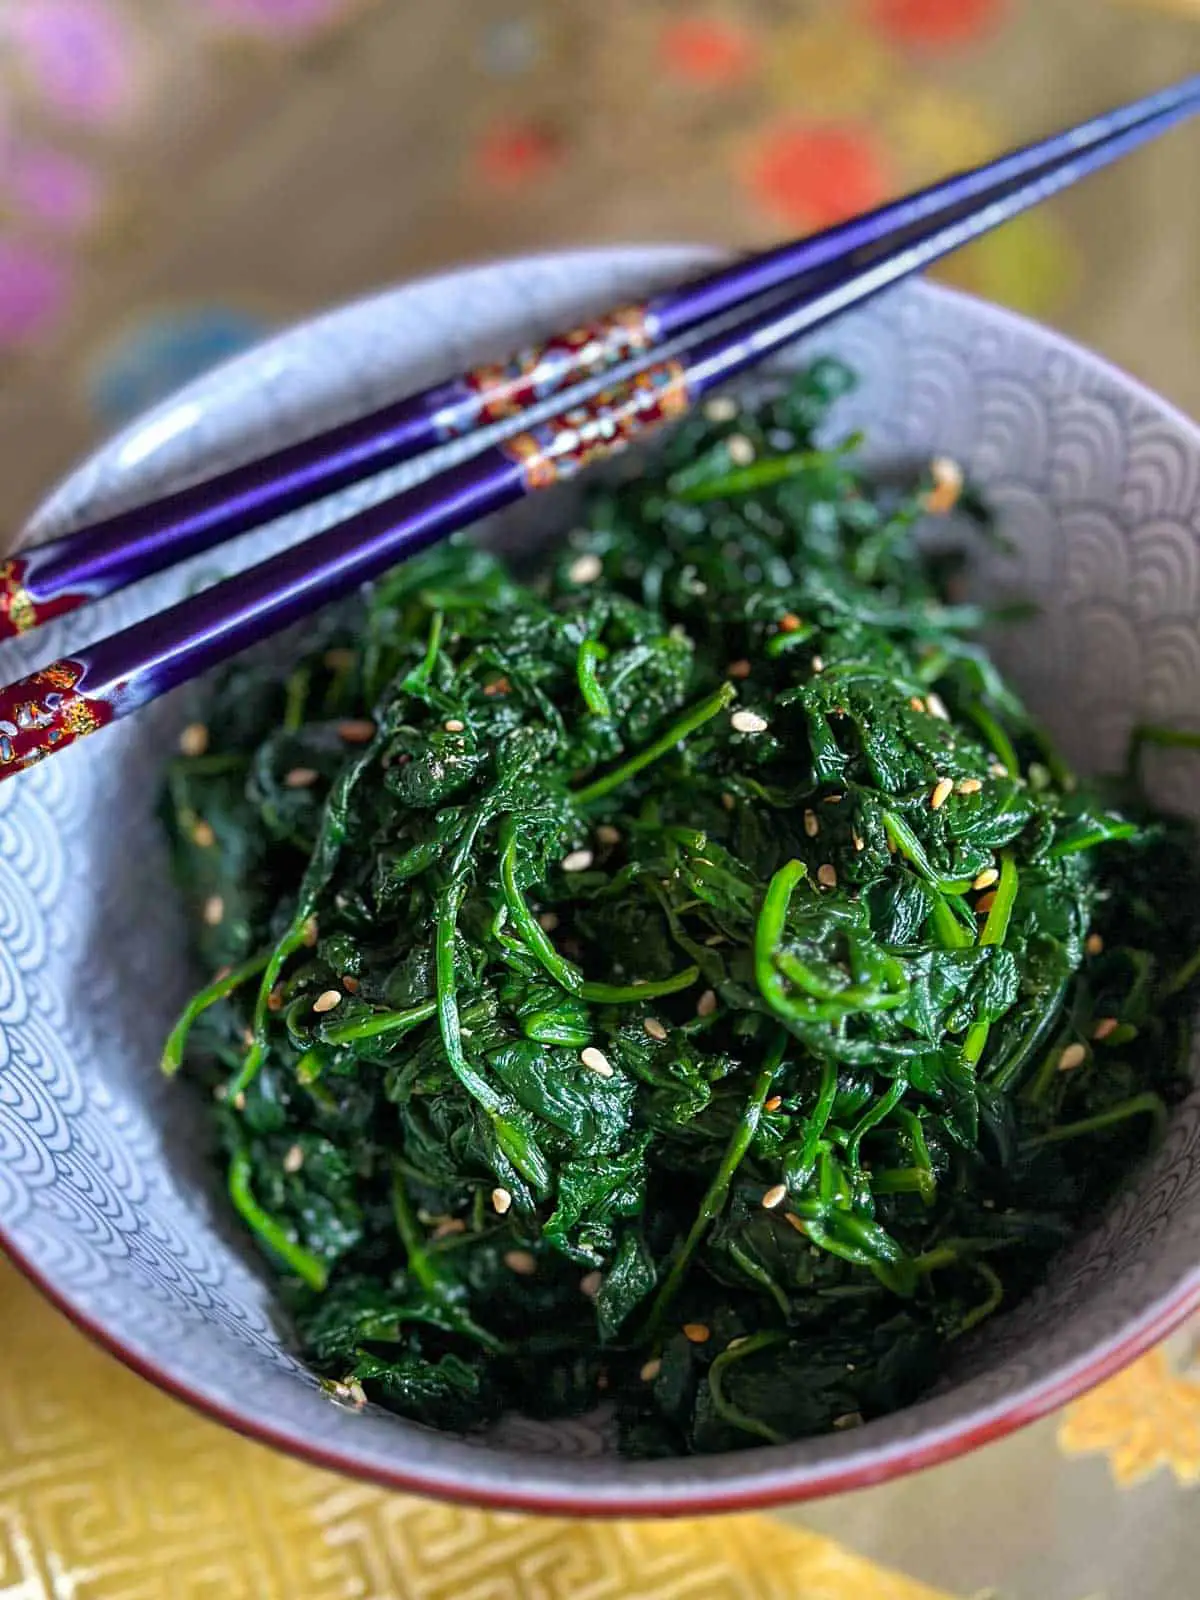 Asian style spinach flecked with sesame seeds placed in a patterned bowl with a pair of purple chopsticks resting on the bowl.